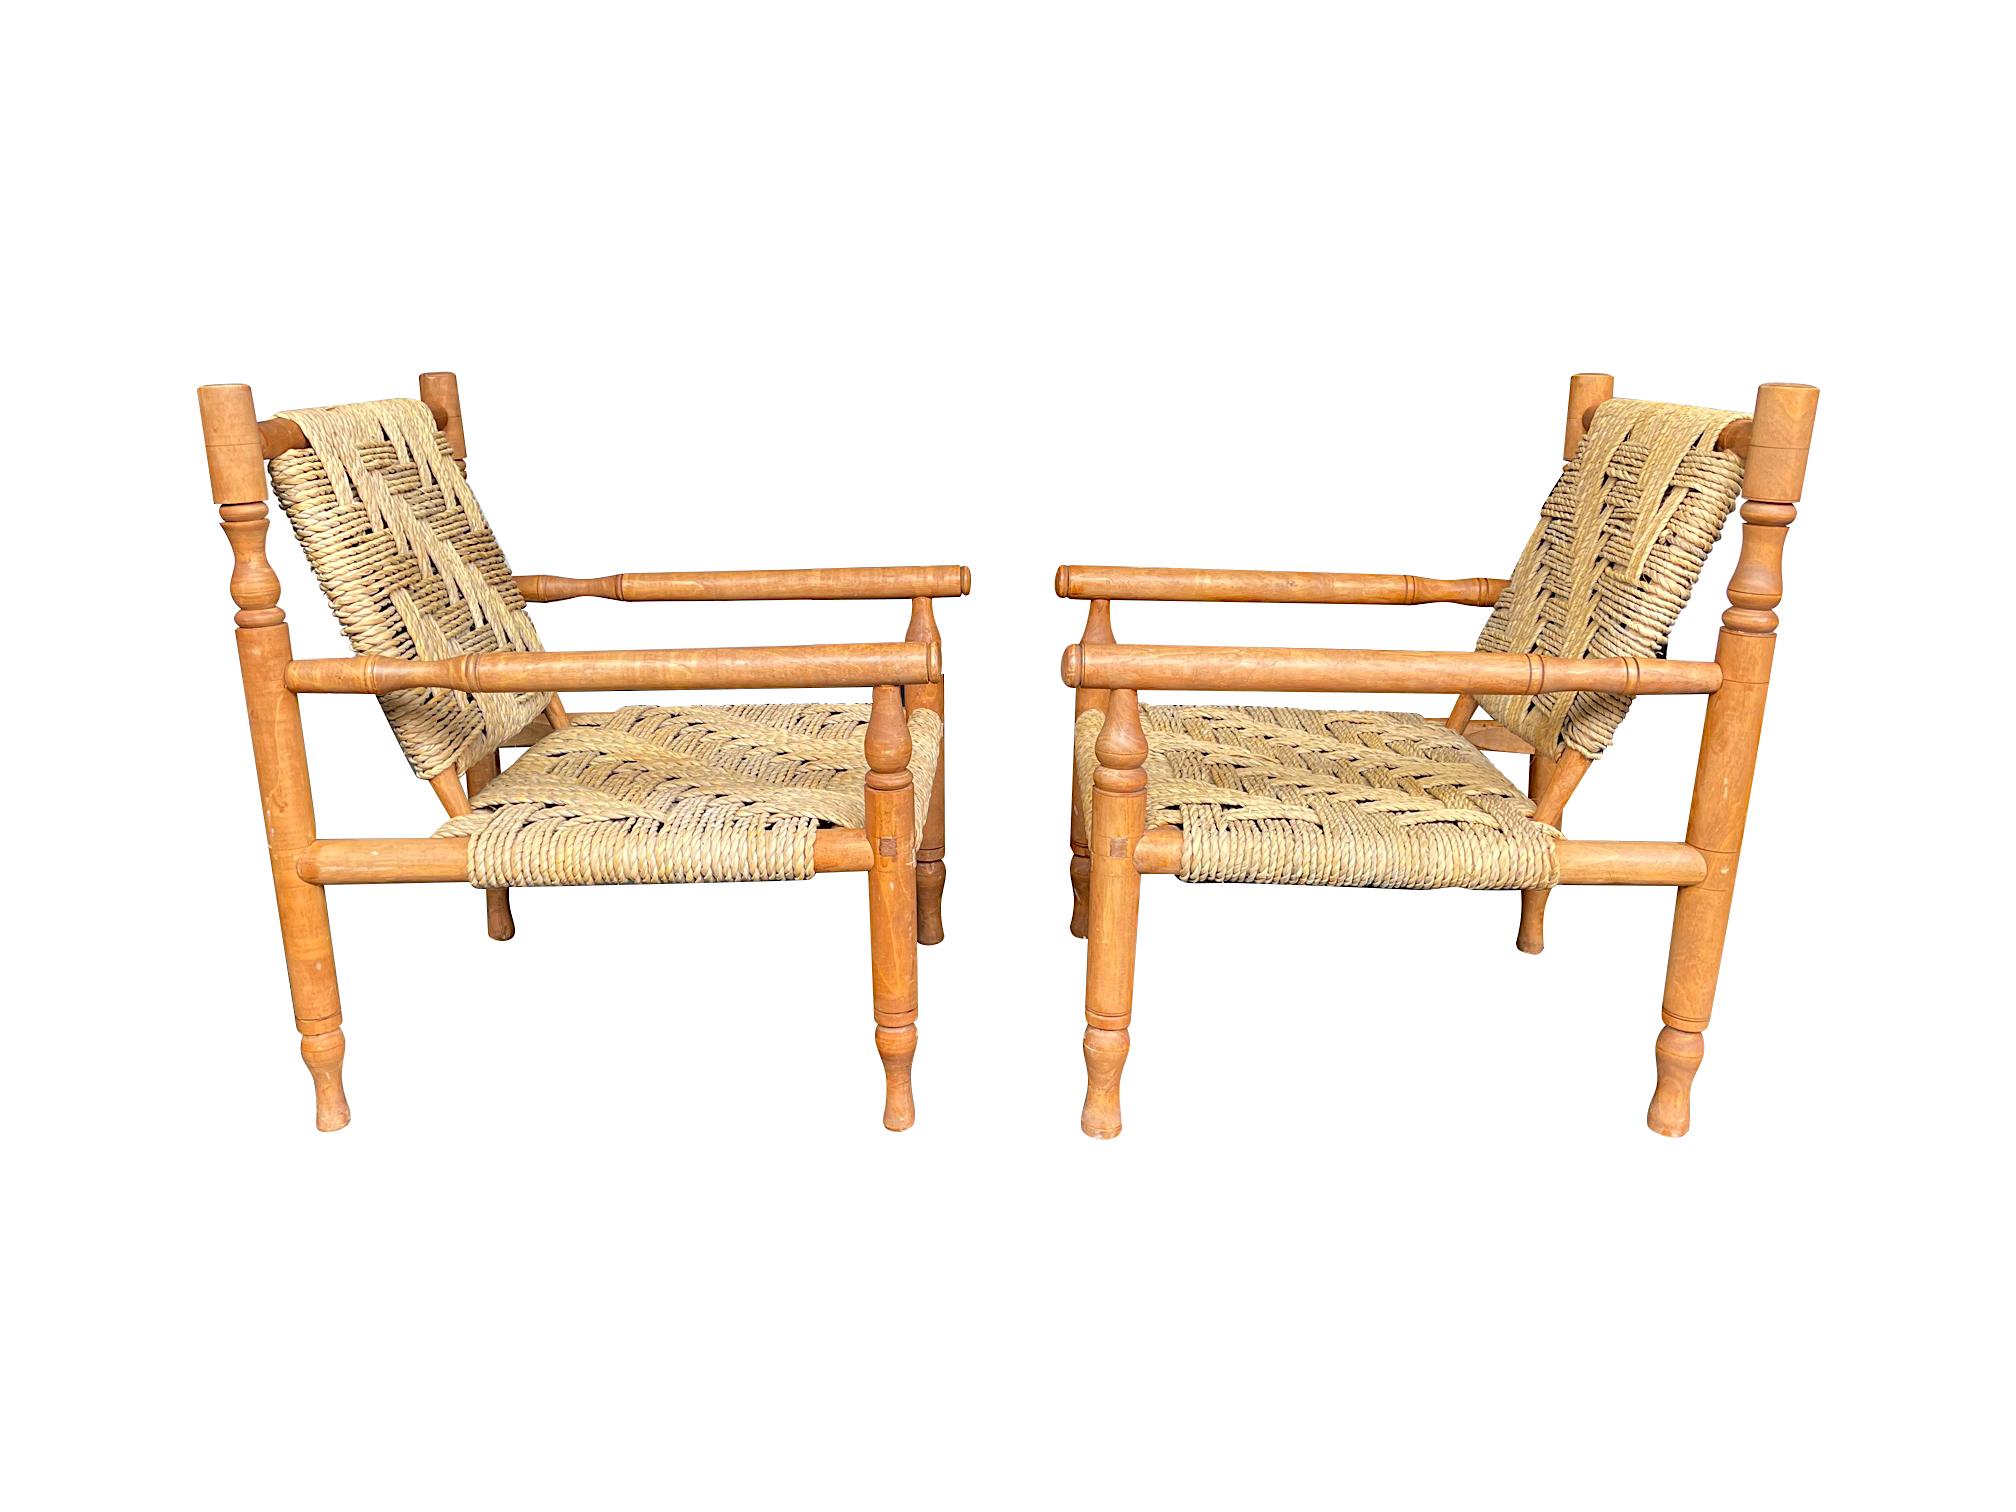 A wonderful pair of 1950s armchairs by Adrian Audoux and Frida Minet with primitive style hand turned beech wood frames and orignal handwoven abaca rope seats and backs, all in perfect original condition. These beautifully designed iconic chairs are